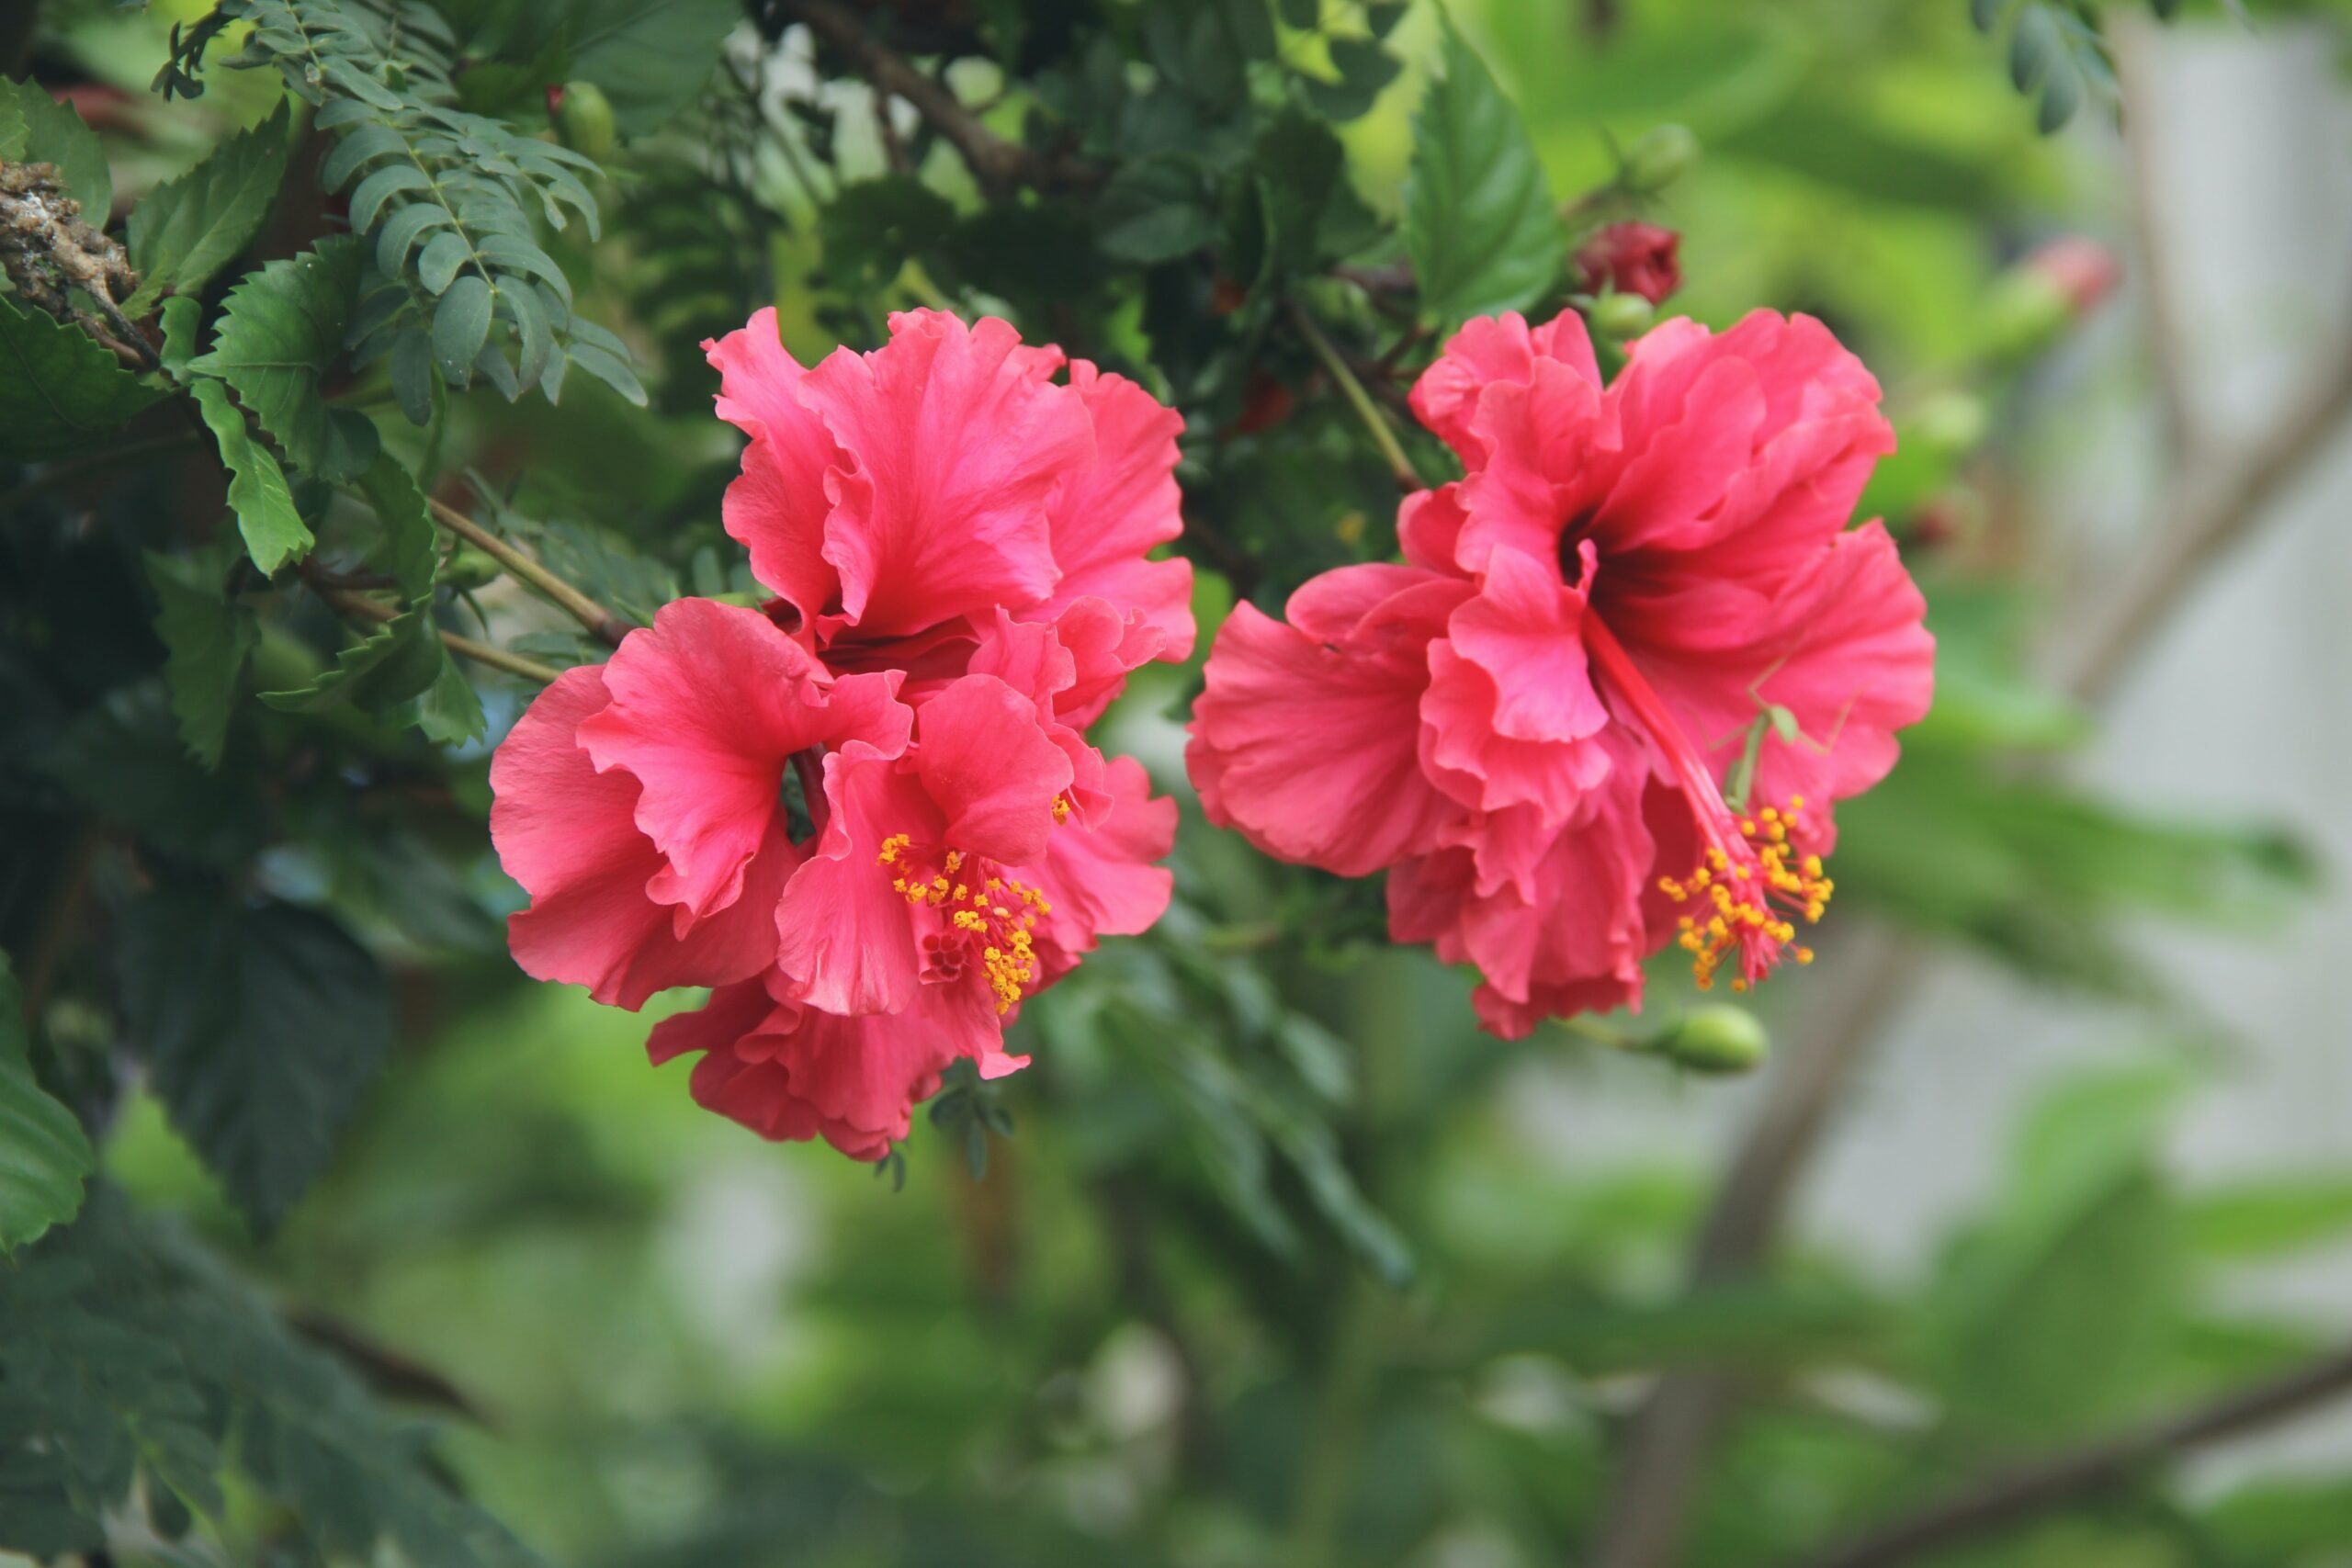 A hibiscus plant, as shown, is the perfect tropical plant for a Florida tropical landscape.